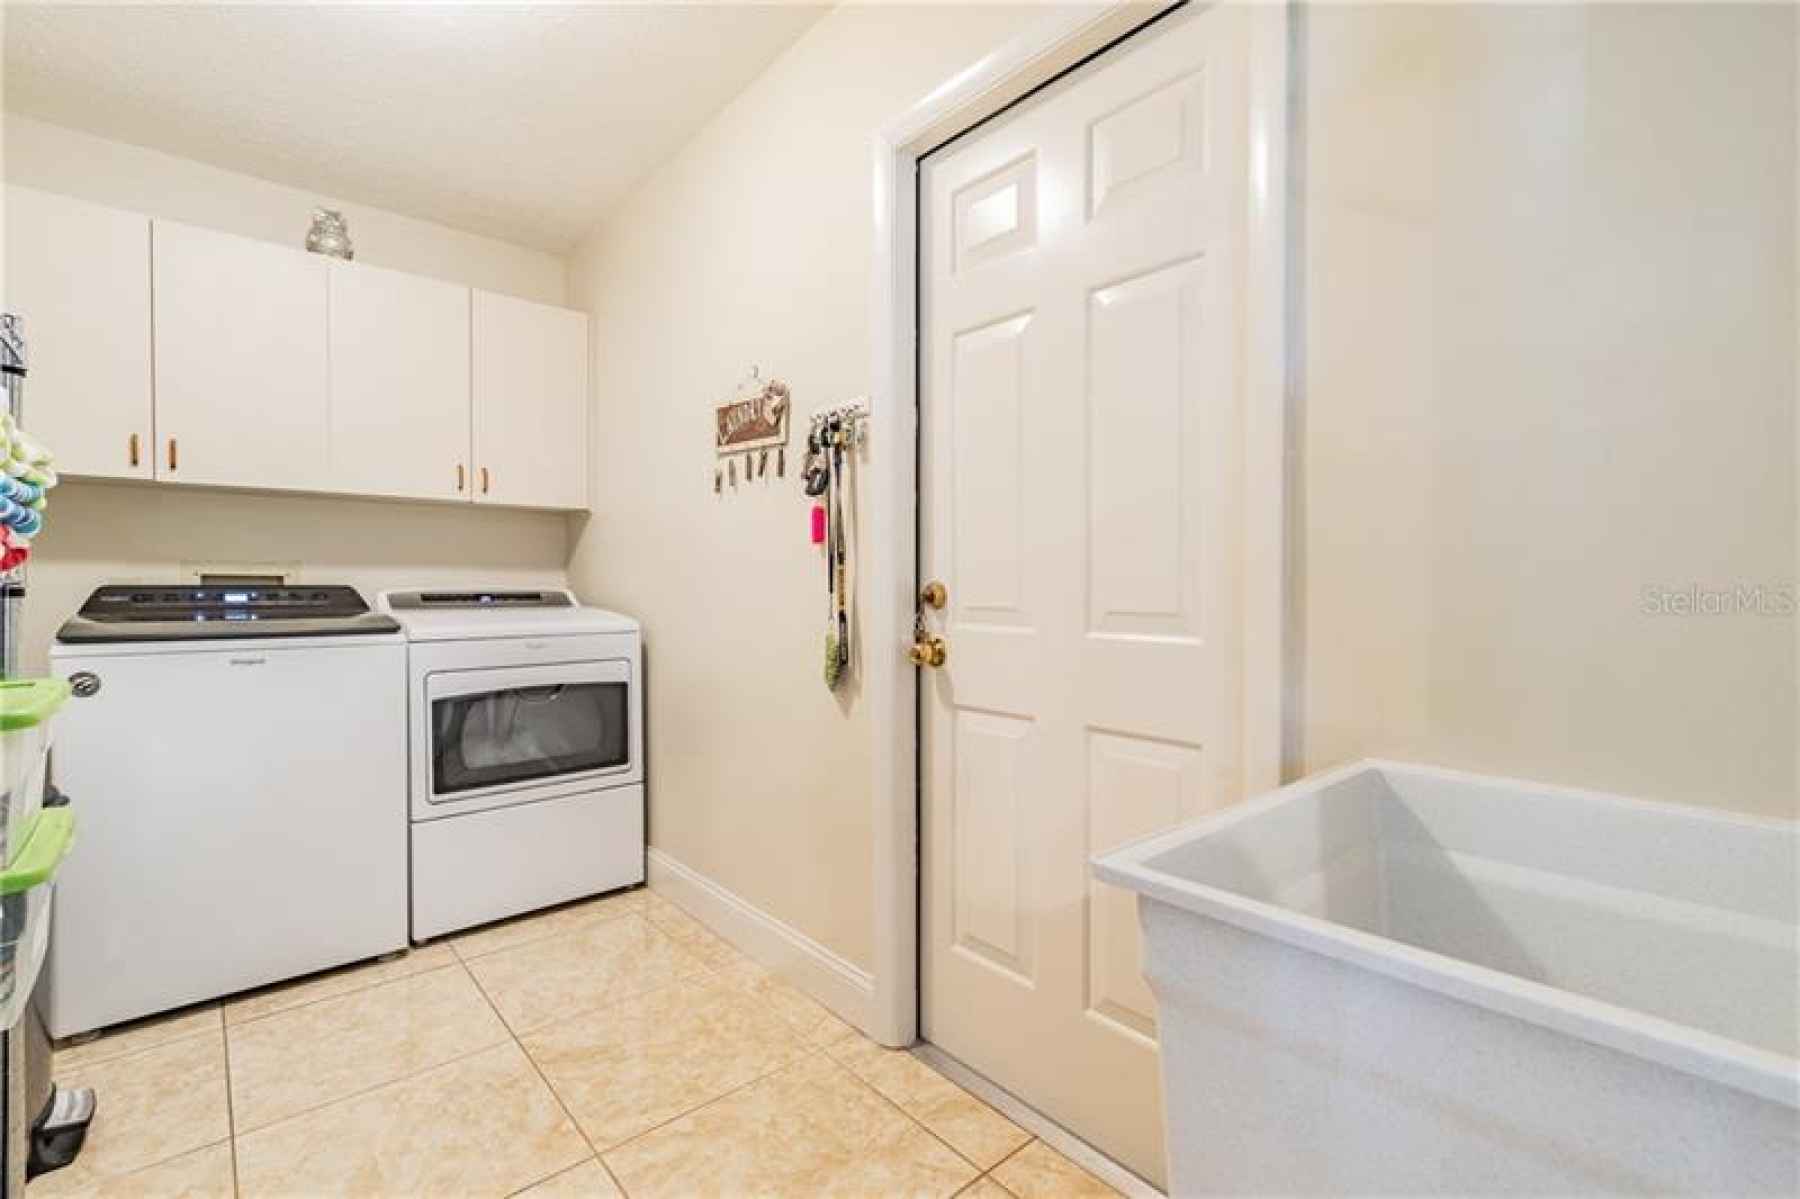 Laundry room and garage access.